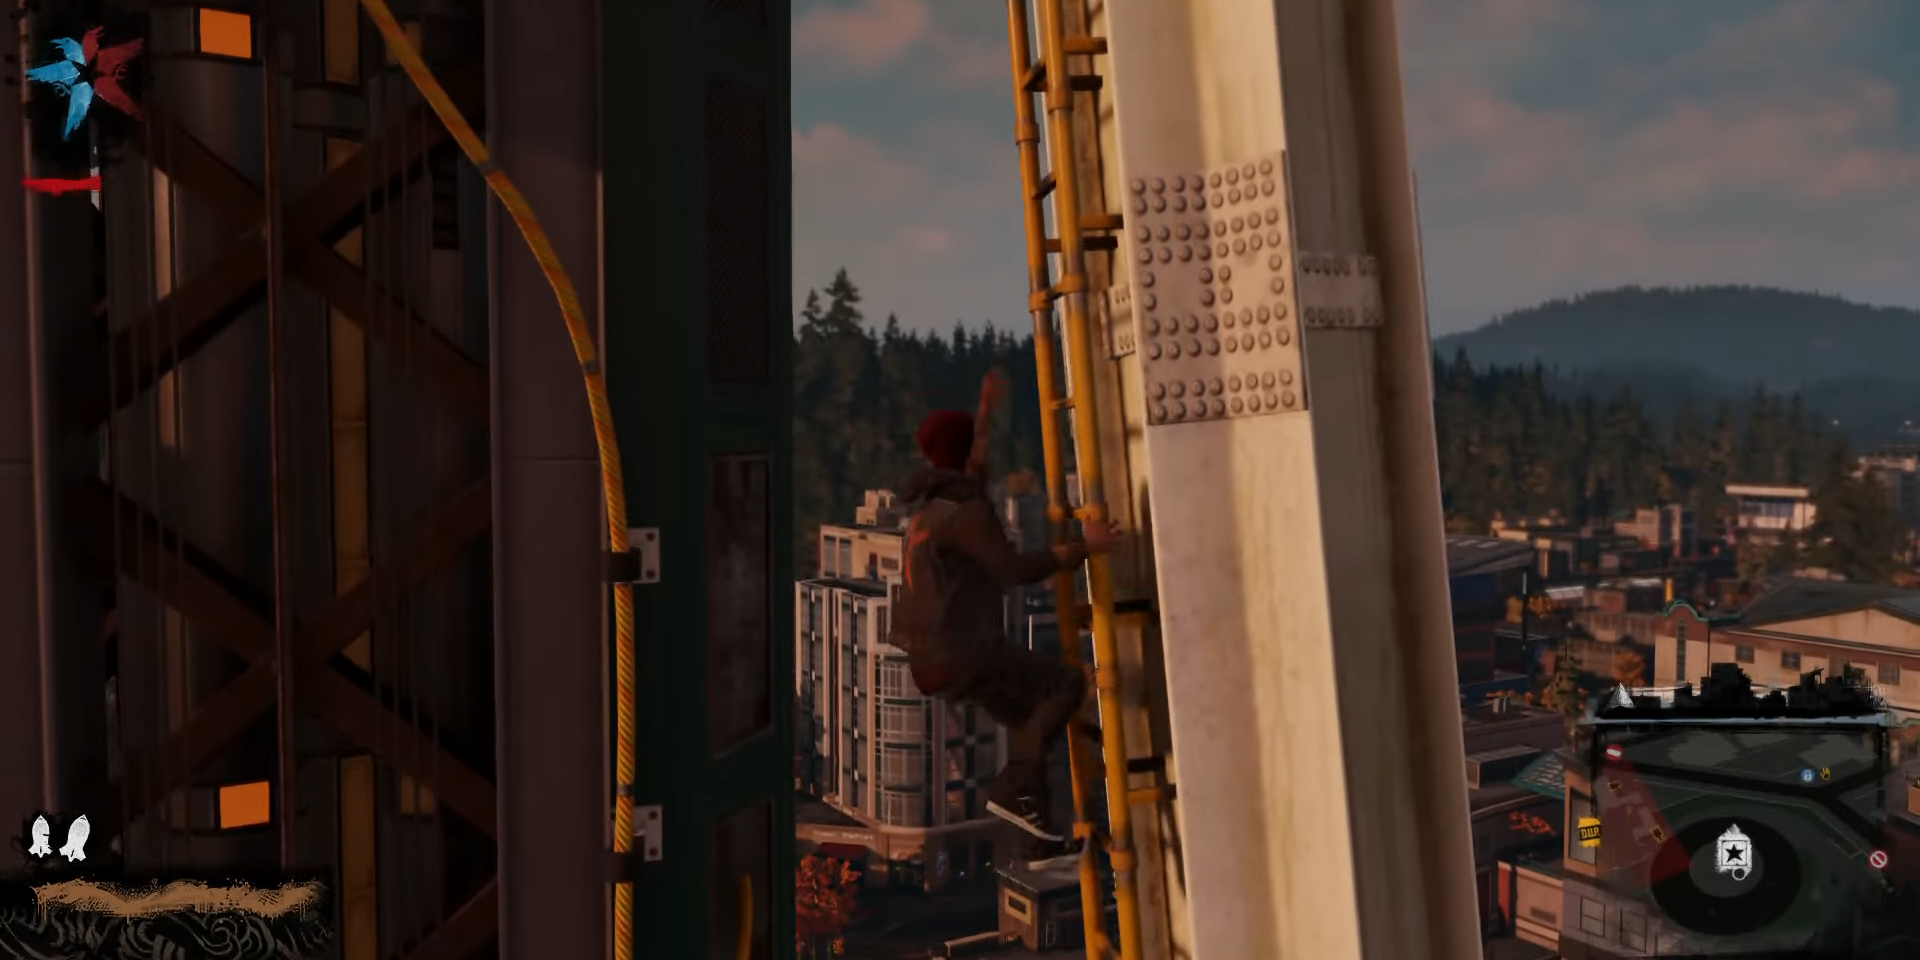 infamous second son space needle yellow ladder and cables